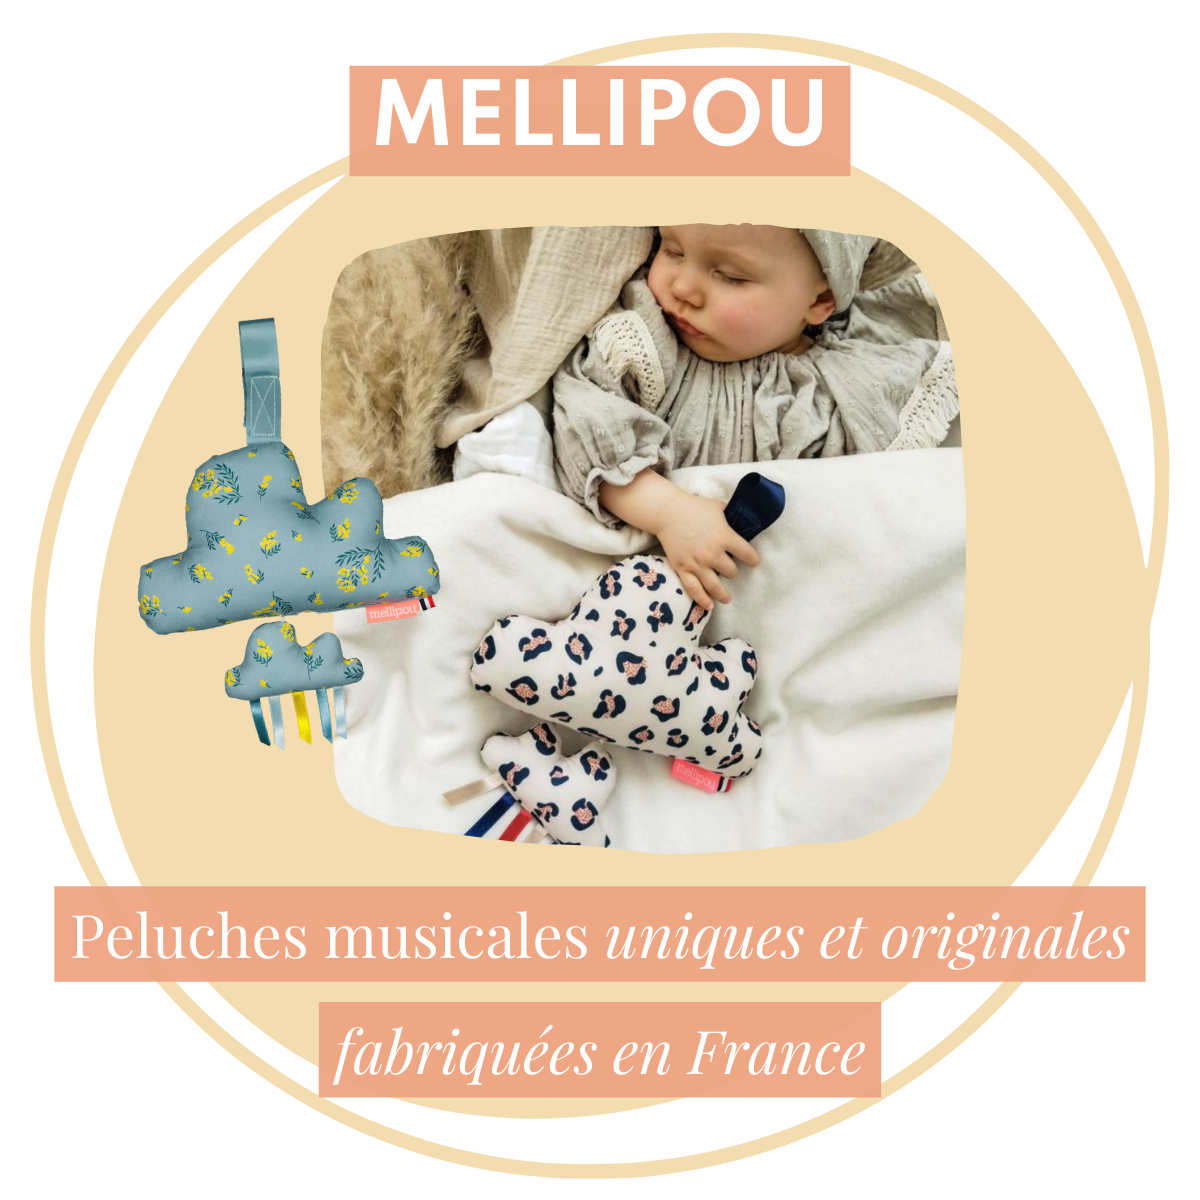 Mellipou, peluche musicale made in France